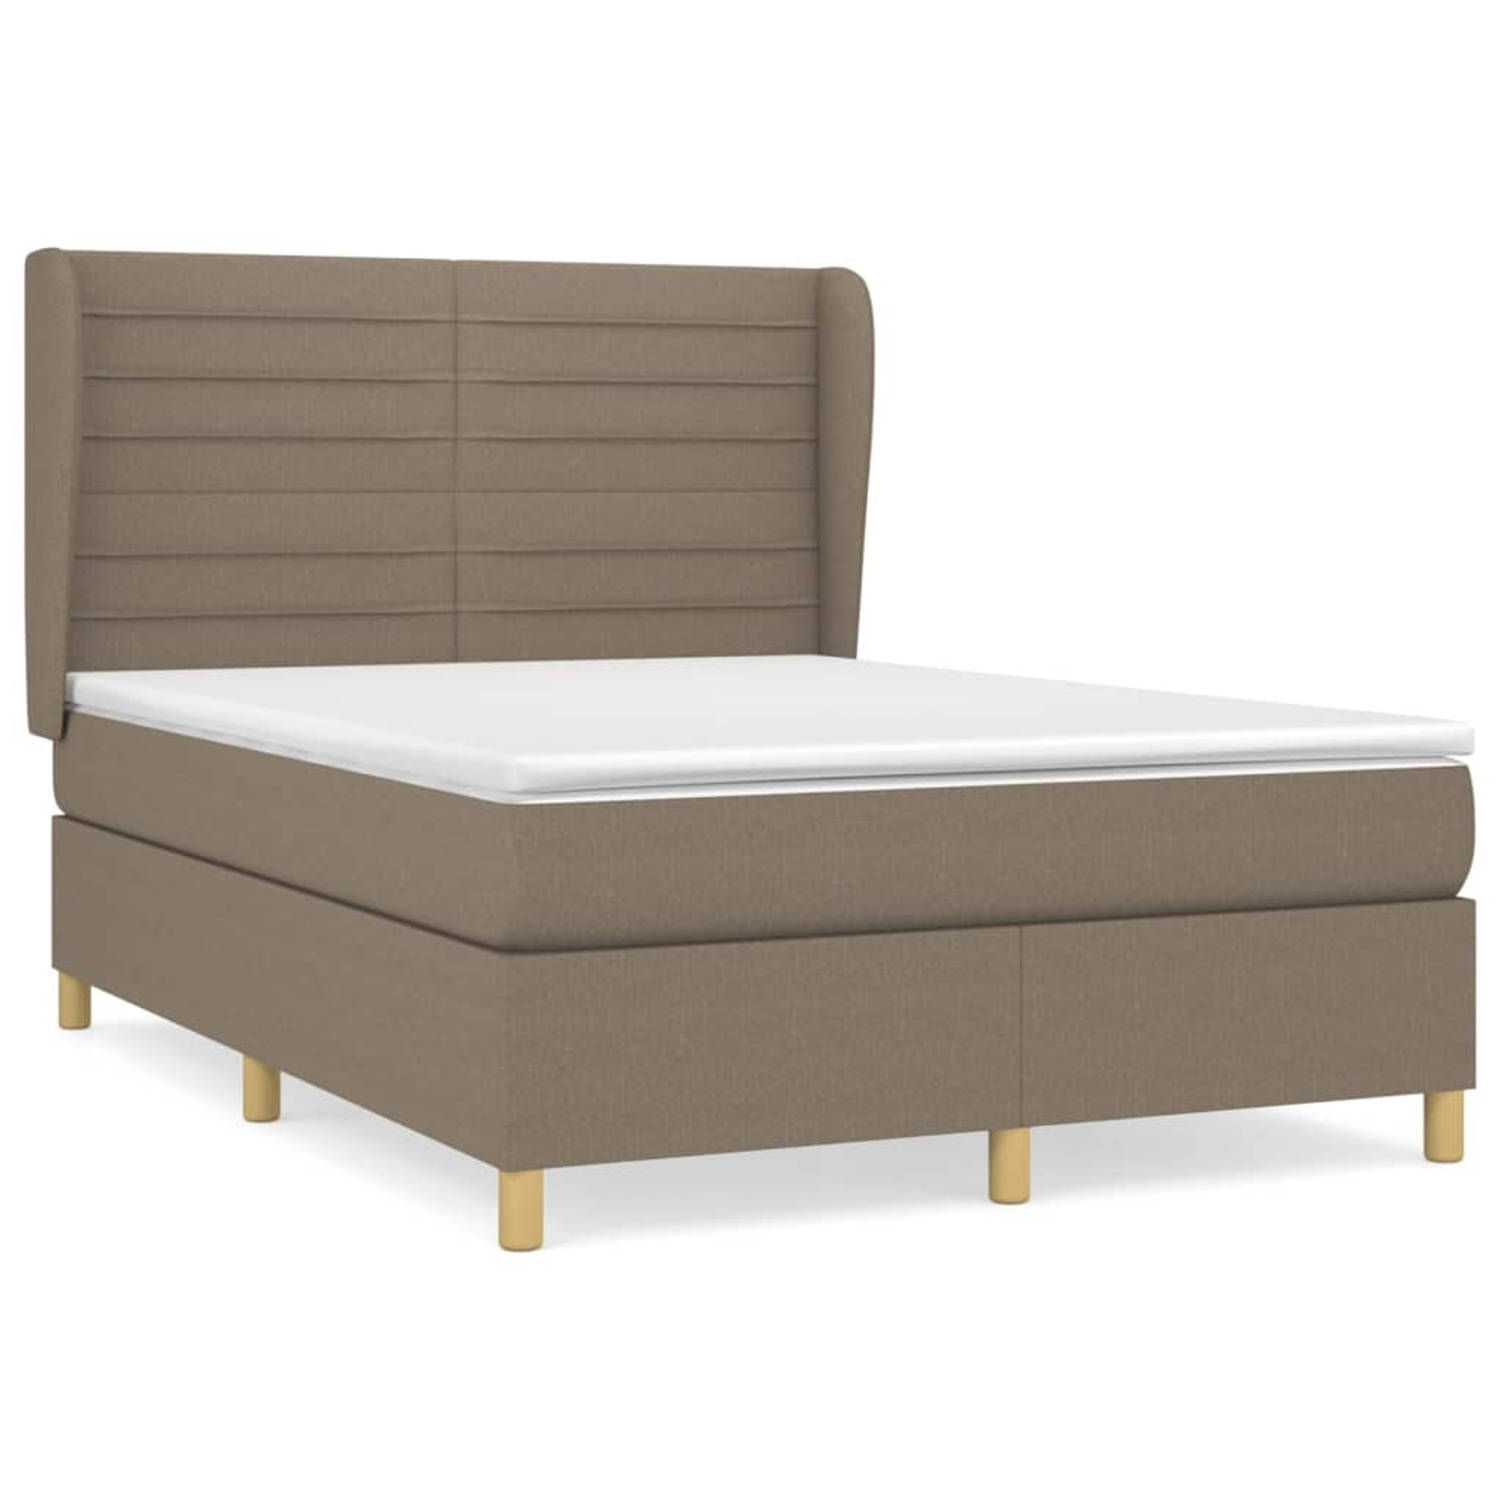 The Living Store Boxspringbed - Taupe - 193 x 147 x 118/128 cm - Comfortabele ondersteuning